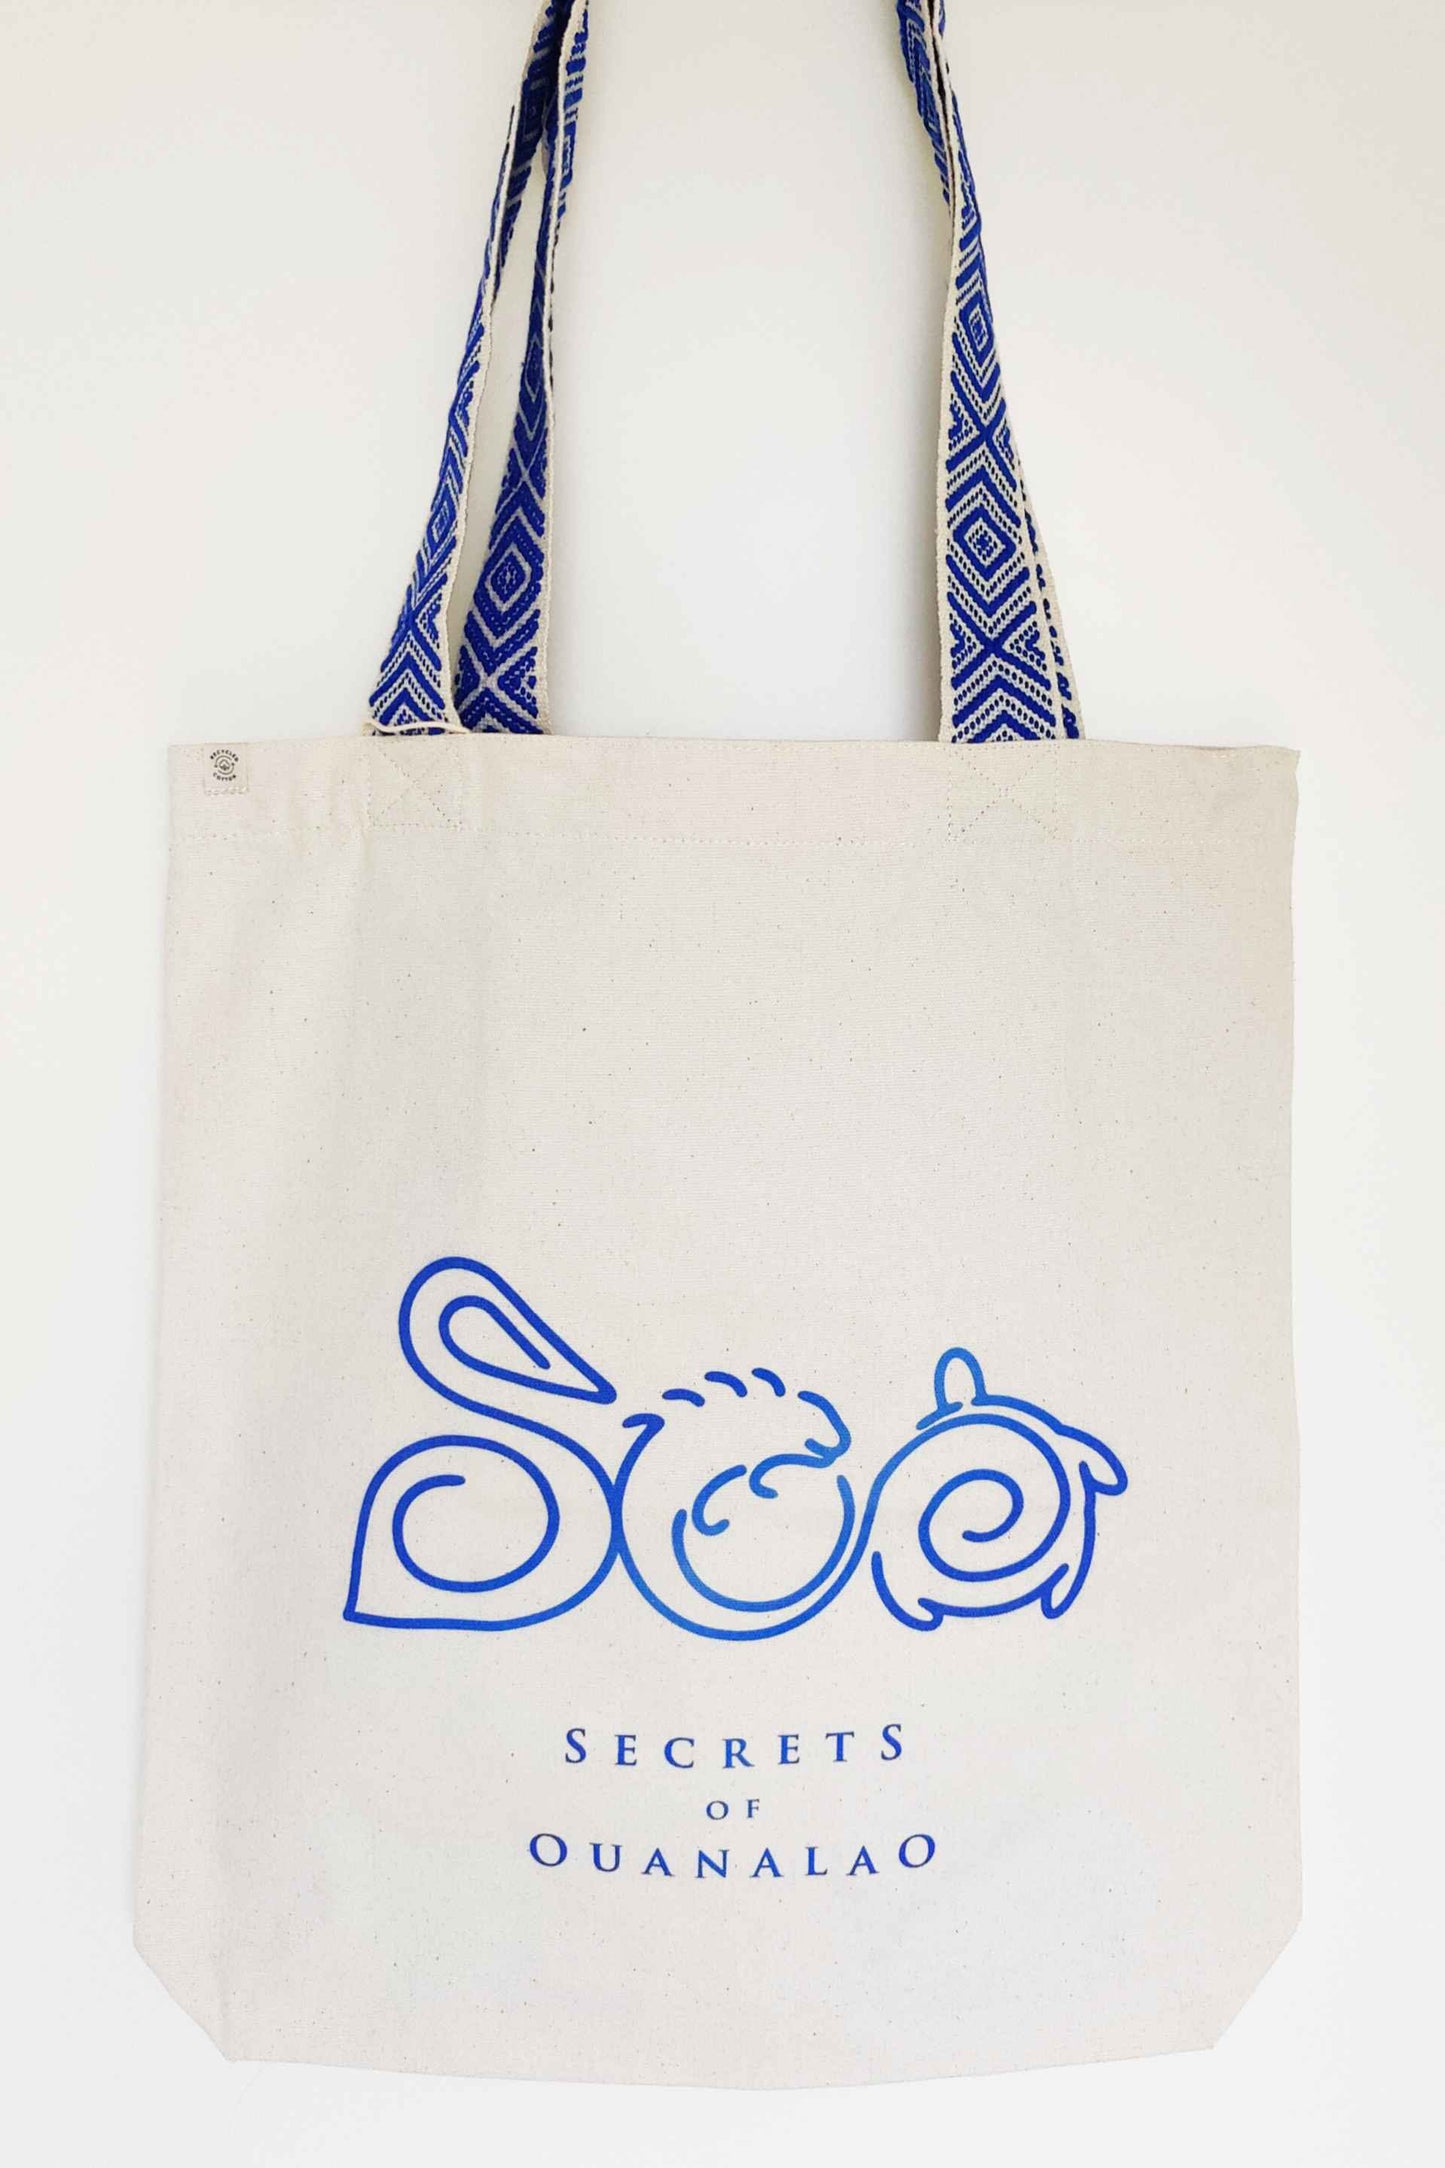 Vegan tote bag with blue handles and logo, including inside zipper pocket. The tote bag is made of recycled cotton.